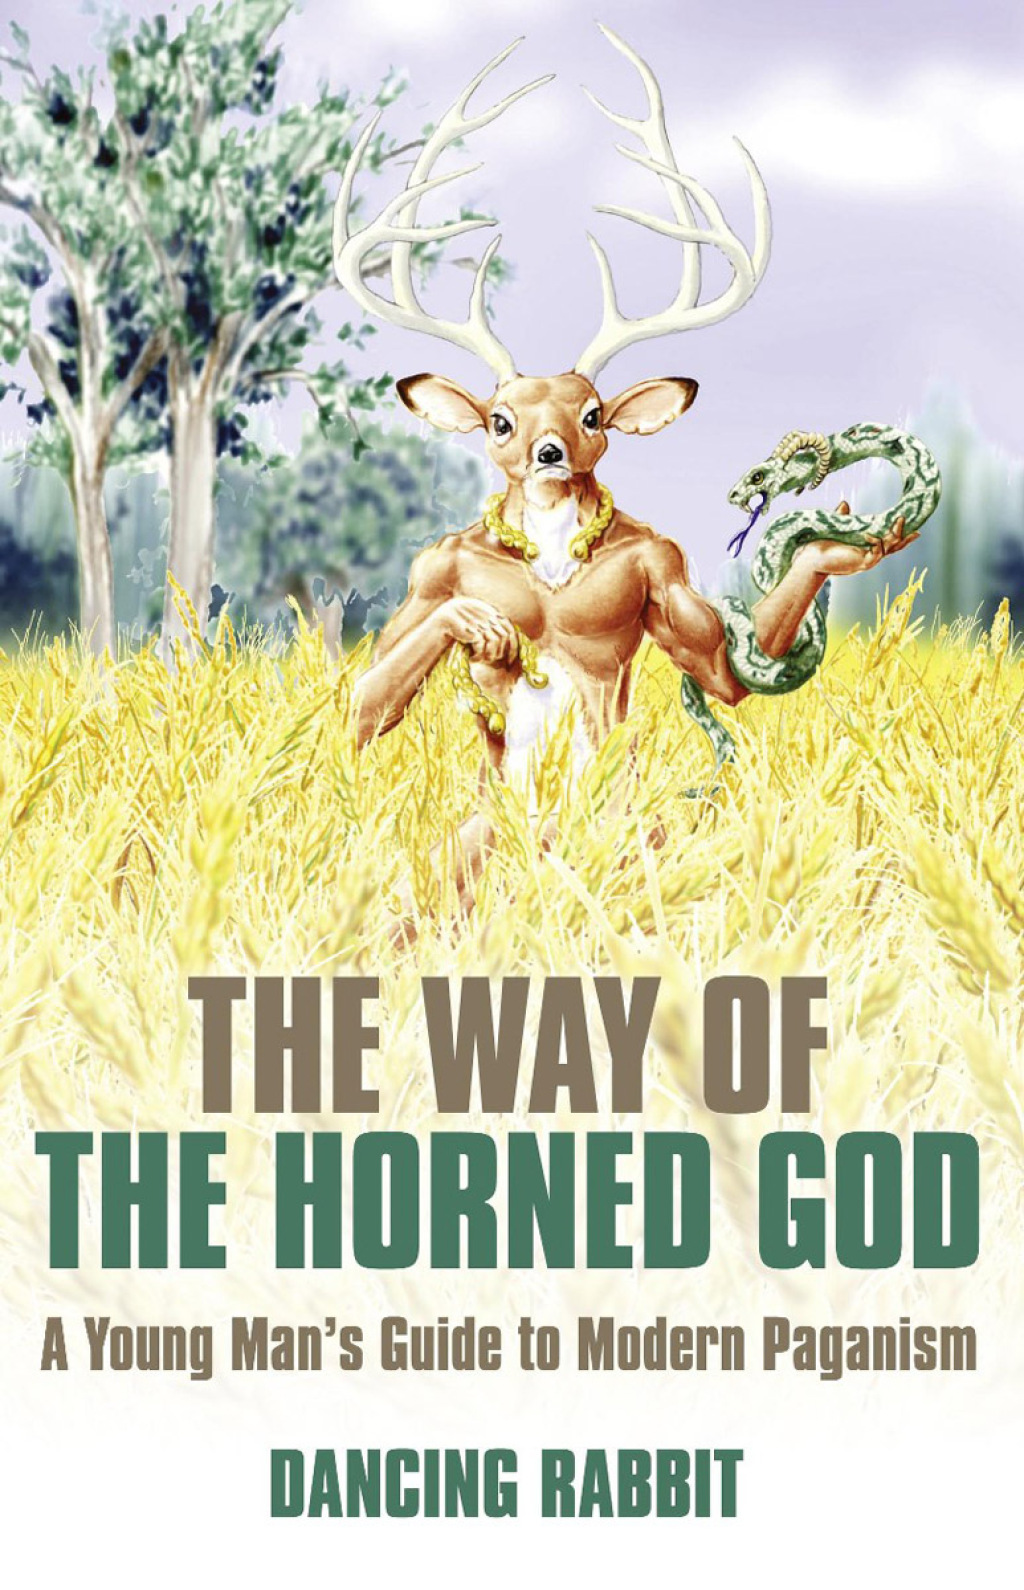 The Way of The Horned God: A Young Man's Guide to Modern Paganism (eBook) - Dancing Rabbit,